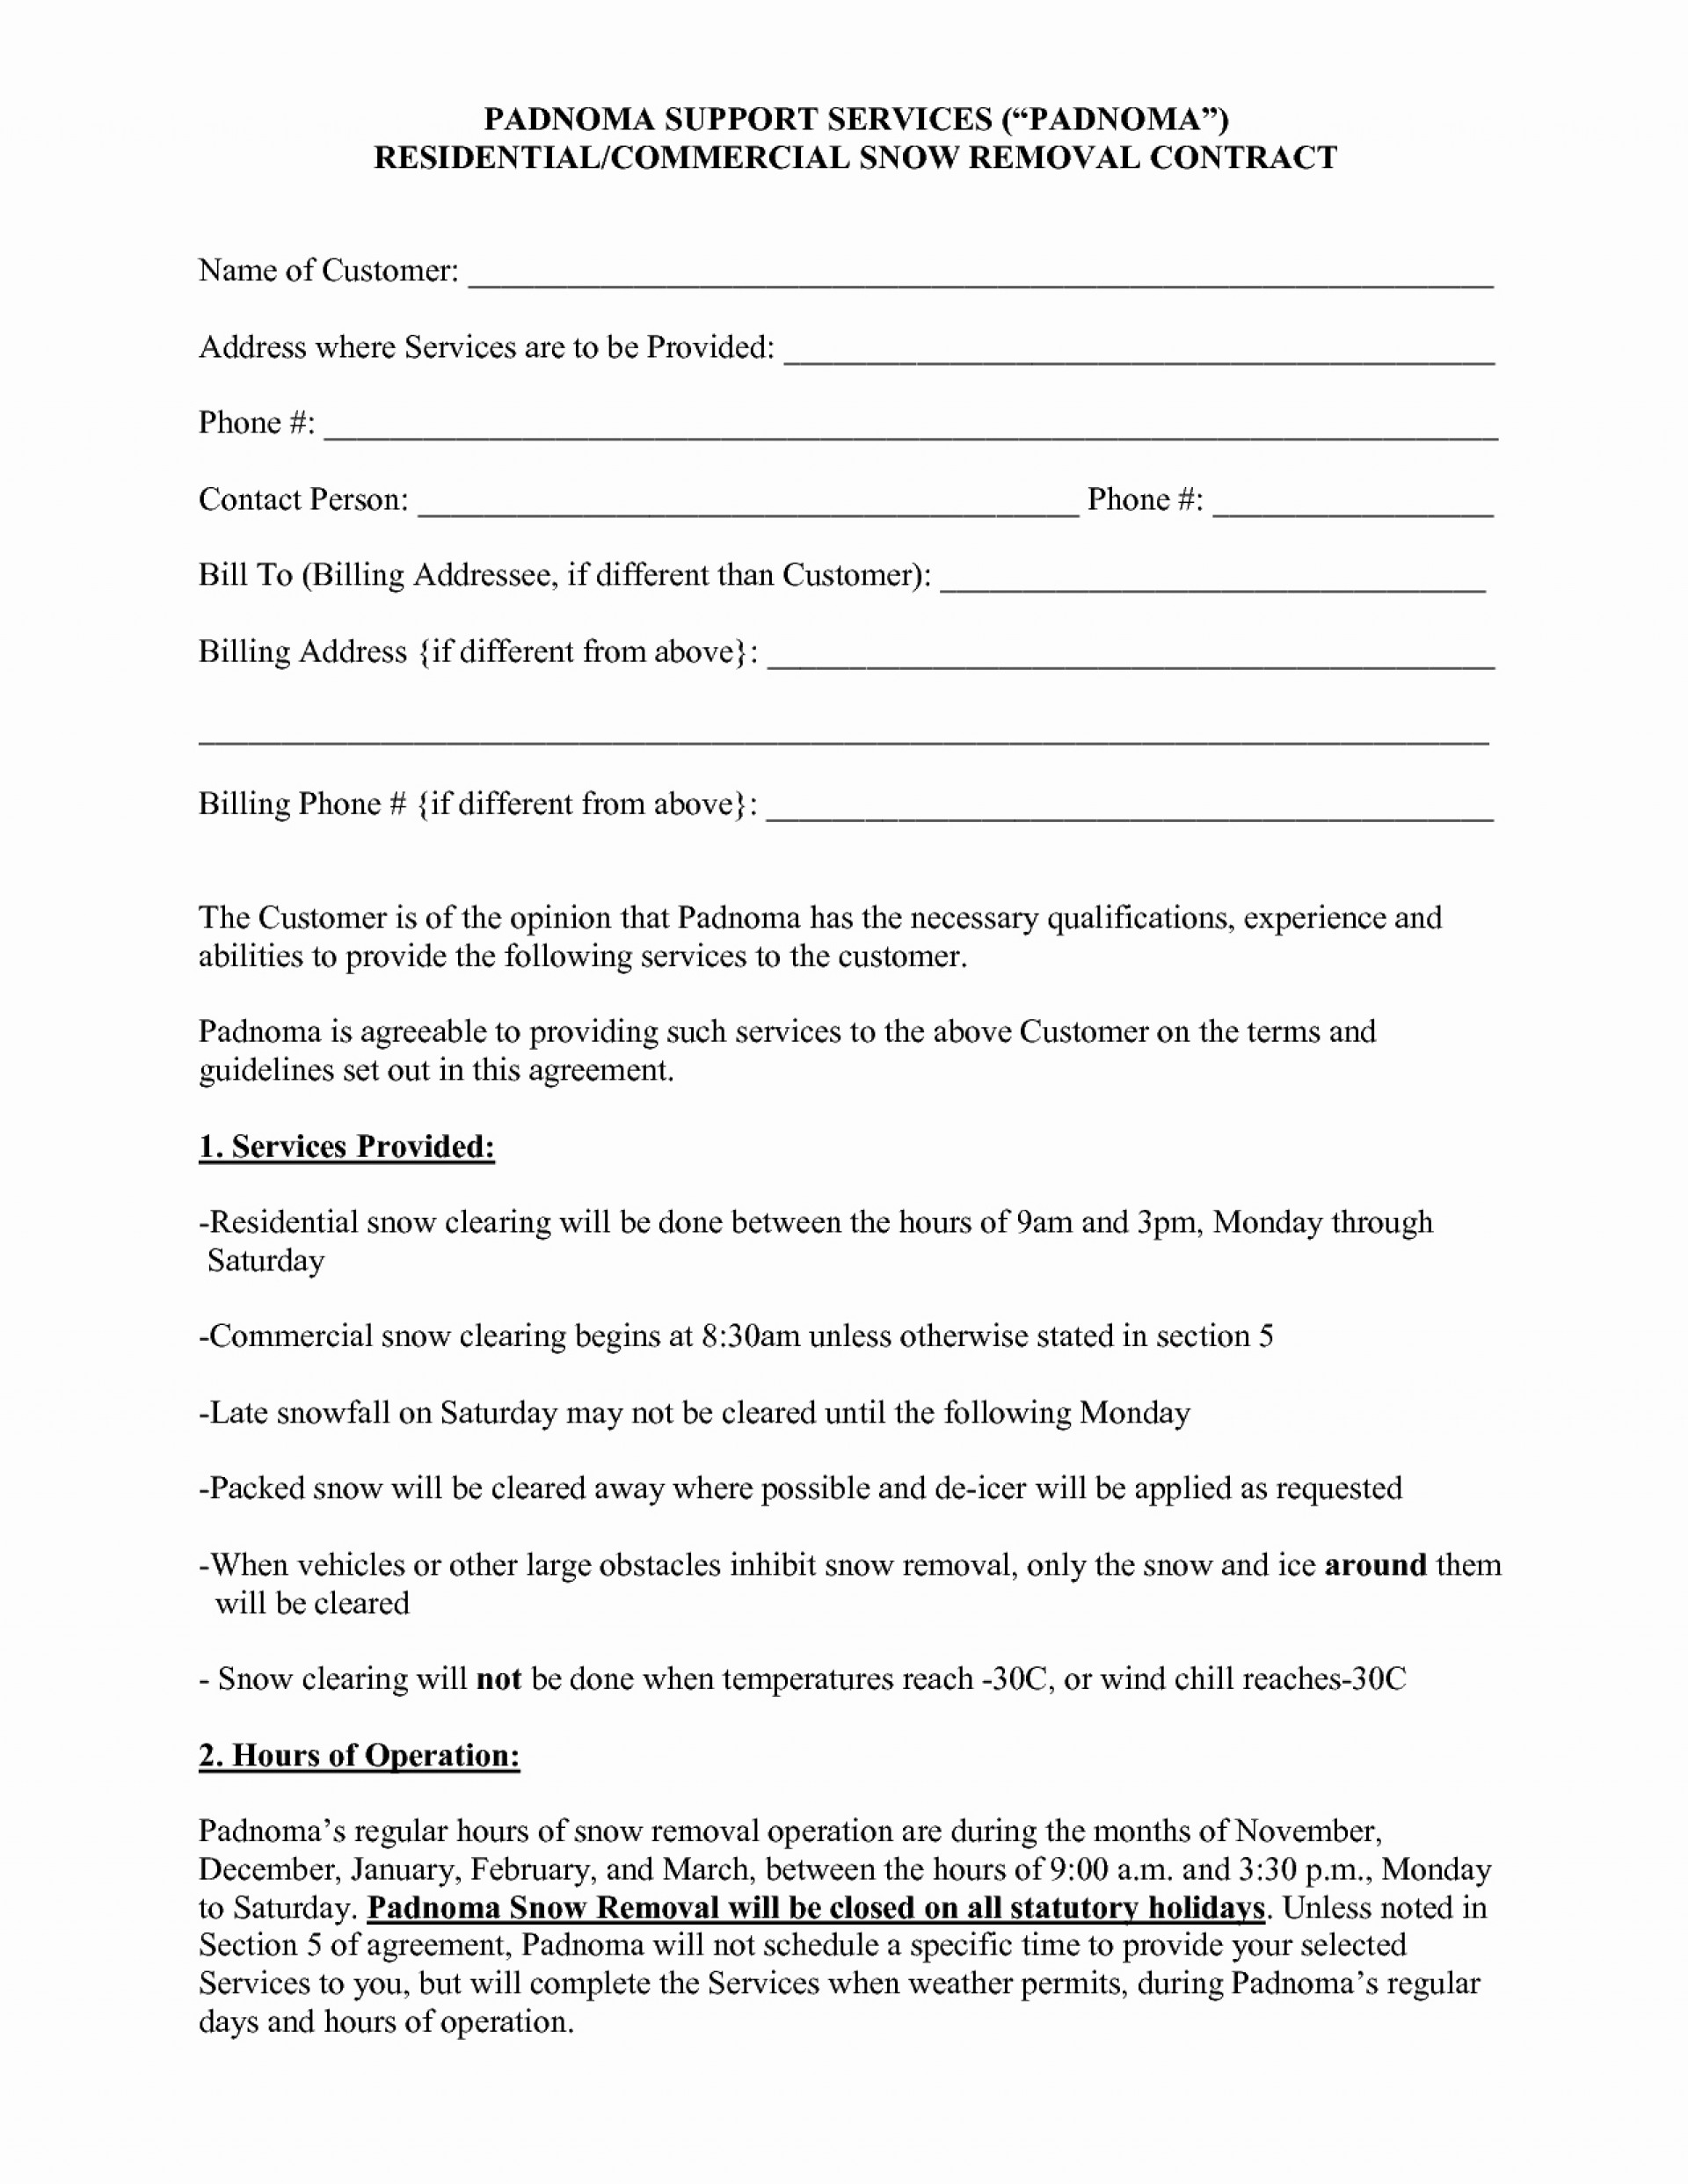 002 Simple Snow Plow Contract Template Removal Stupendous Ideas - Free Printable Snow Removal Contract